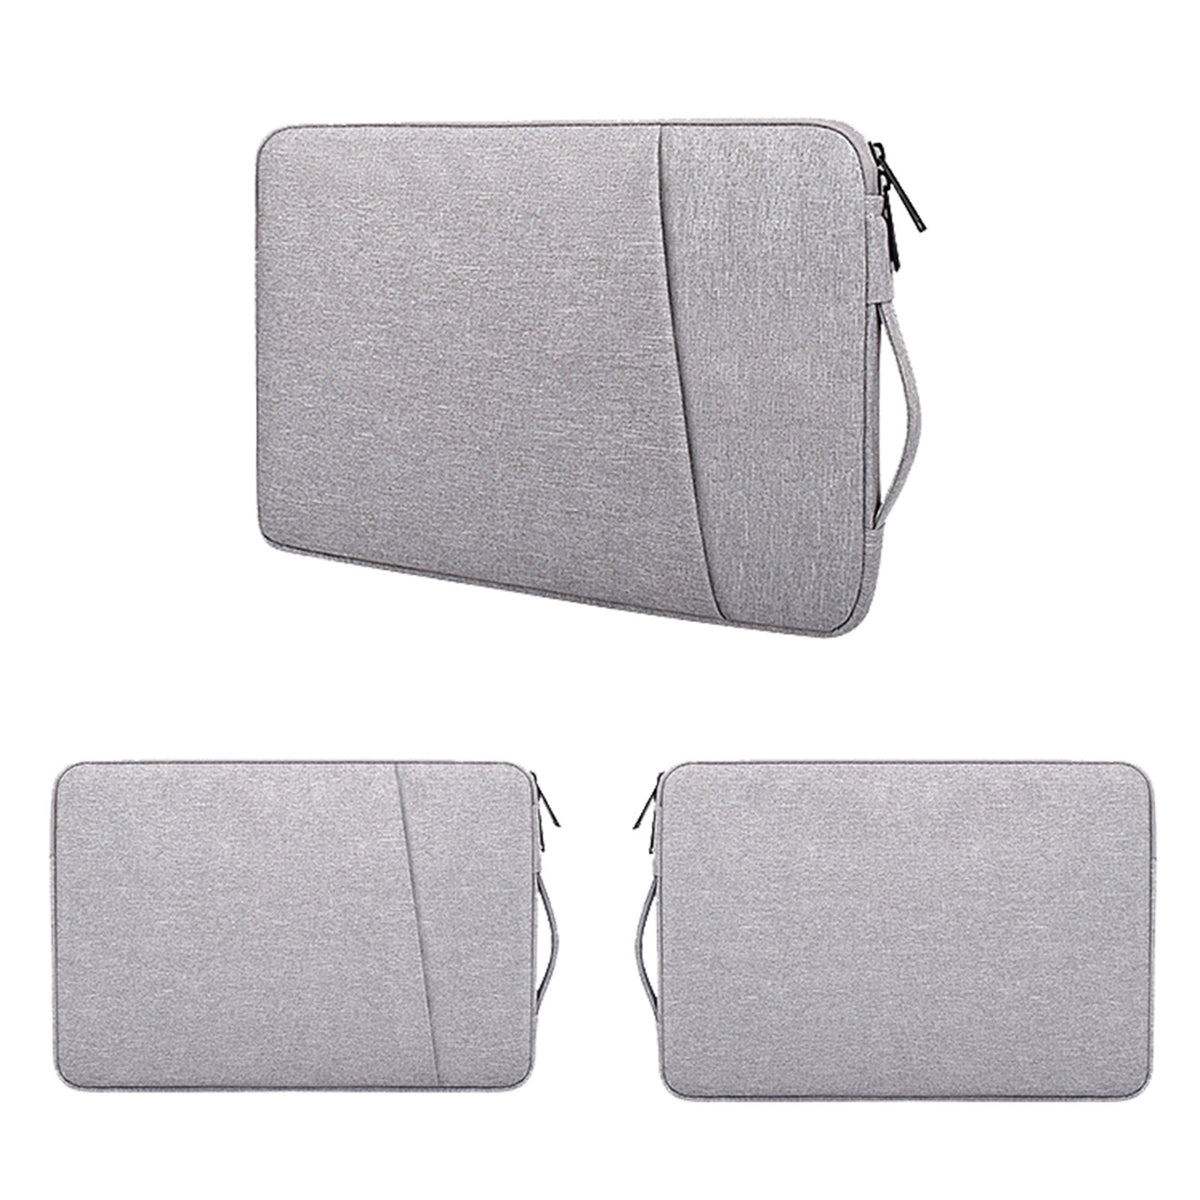 Prevo 14&quot; Laptop Sleeve with Side Pocket - Light Grey | 262186 from Prevo - DID Electrical